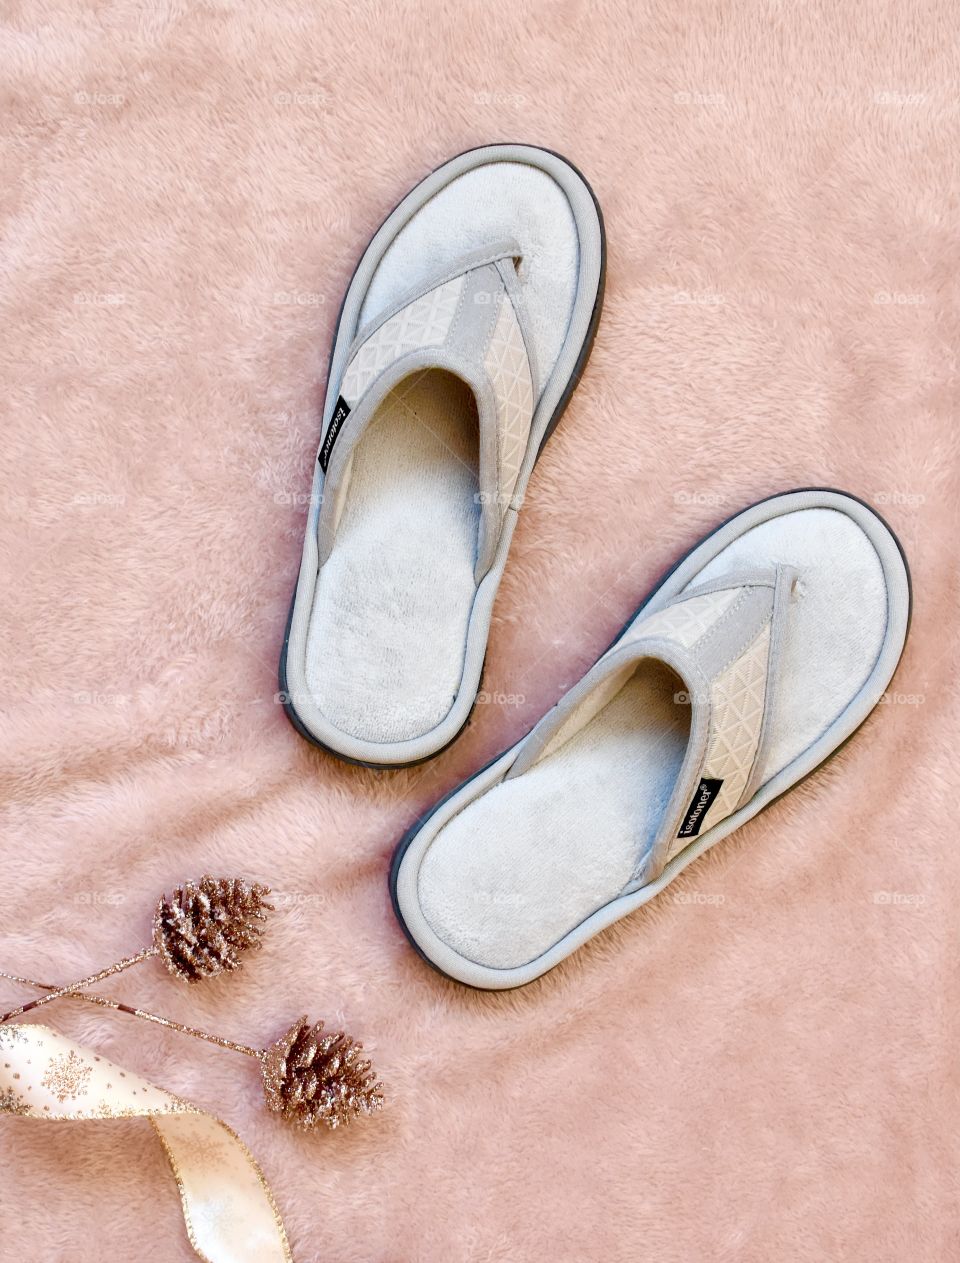 Grey Isotoner slippers in a still life flat lay Christmas set up